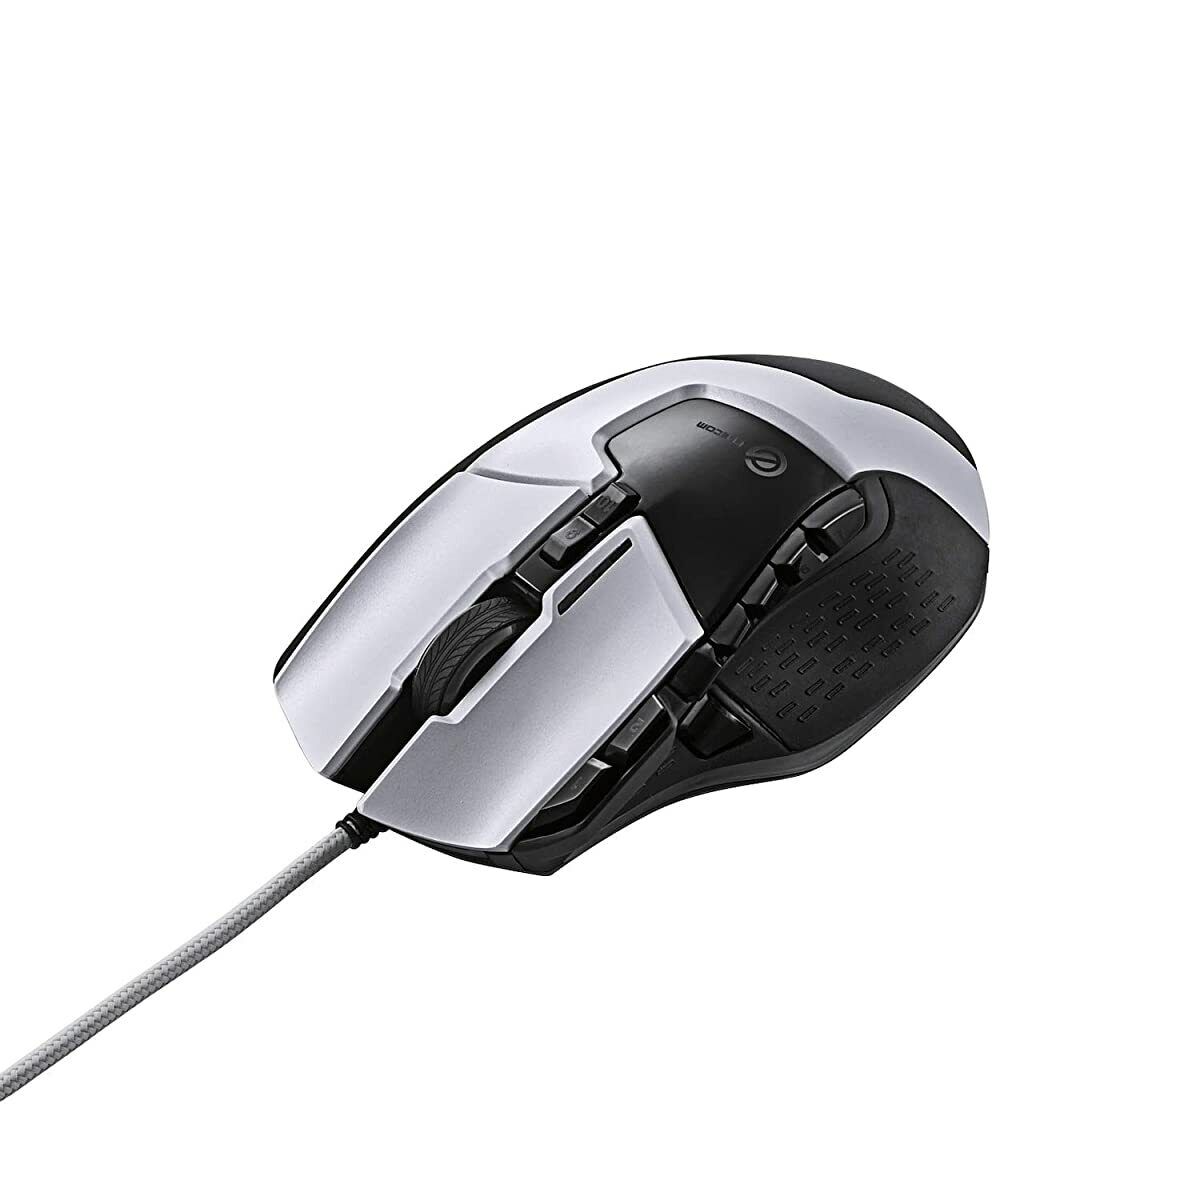 ELECOM gaming mouse 13 button programmable RGB corresponding from Japan